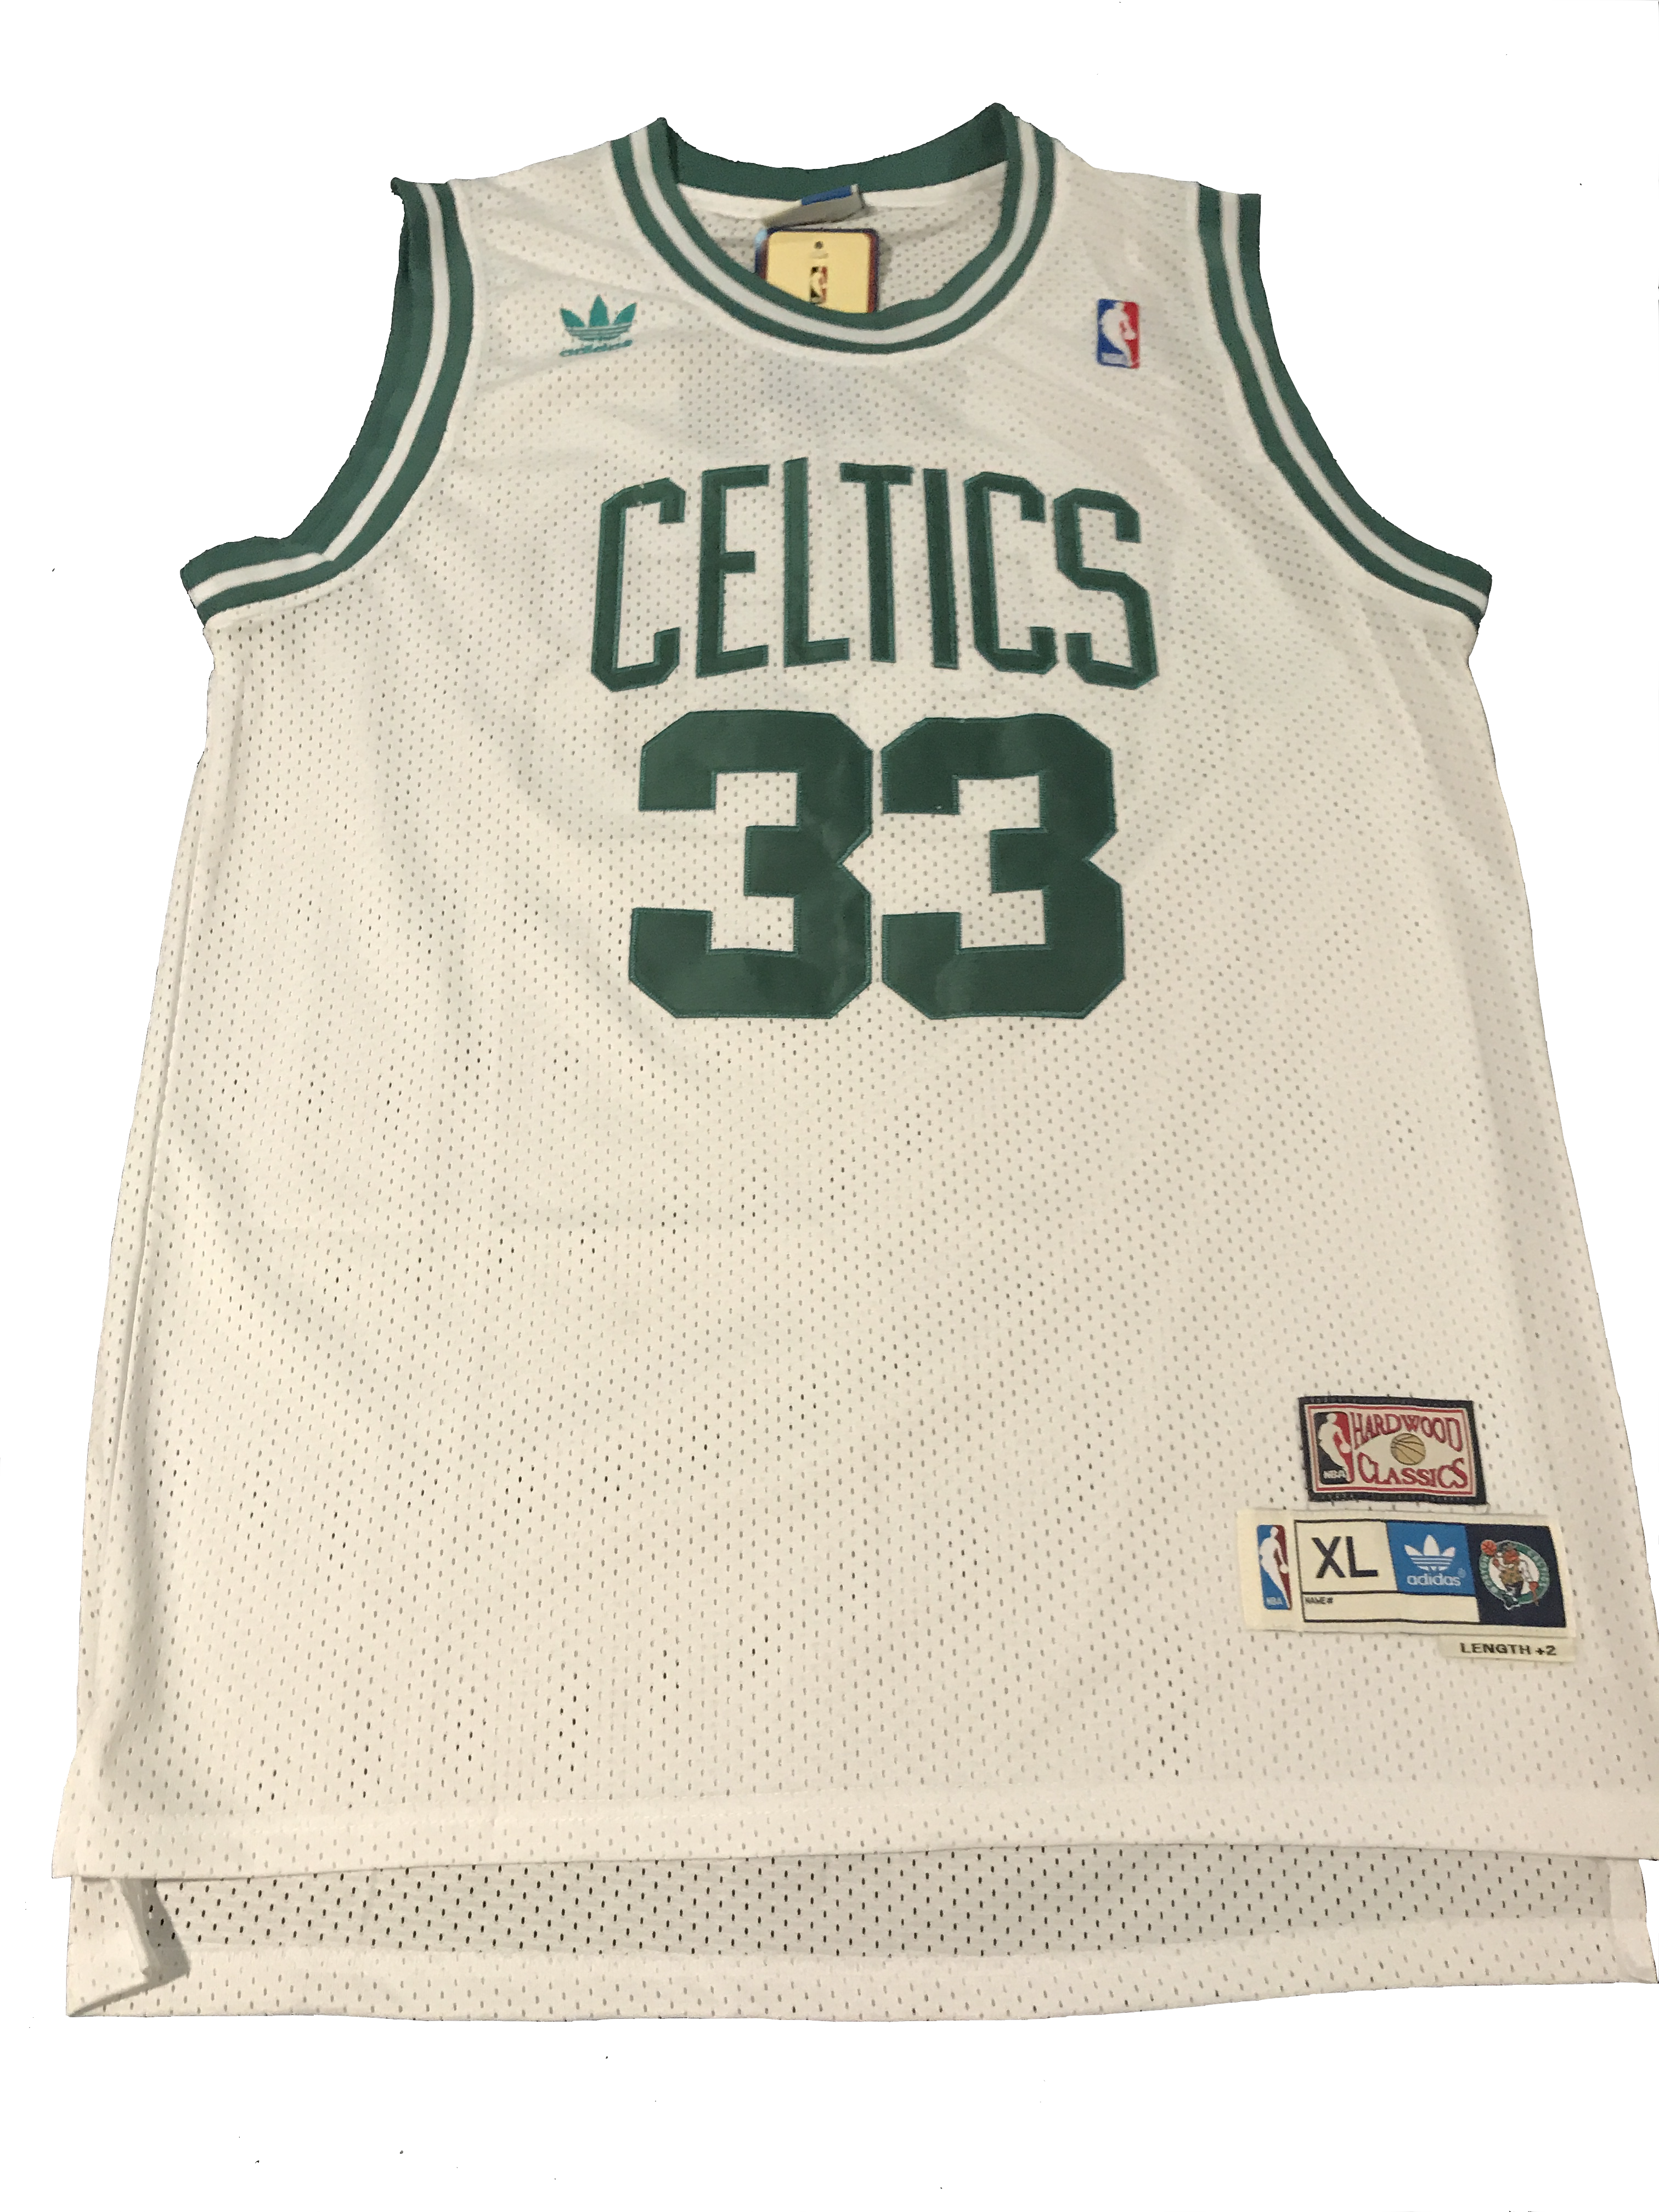 A White Basketball Jersey With Green Letters And Numbers